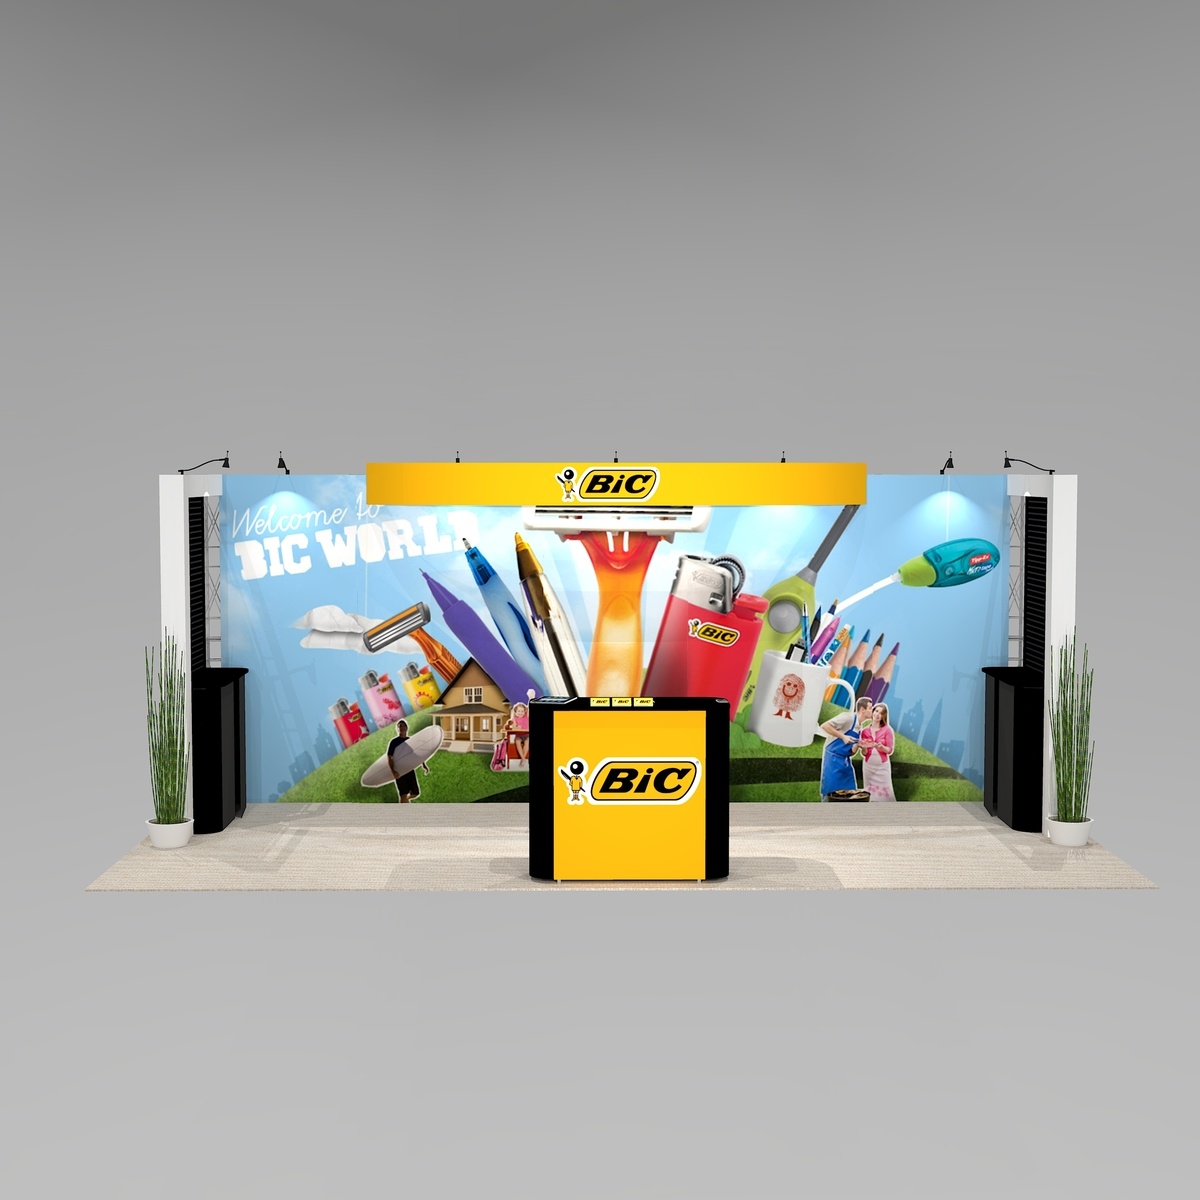 Giant Mural trade show exhibit design SHA1020 Graphic Package B